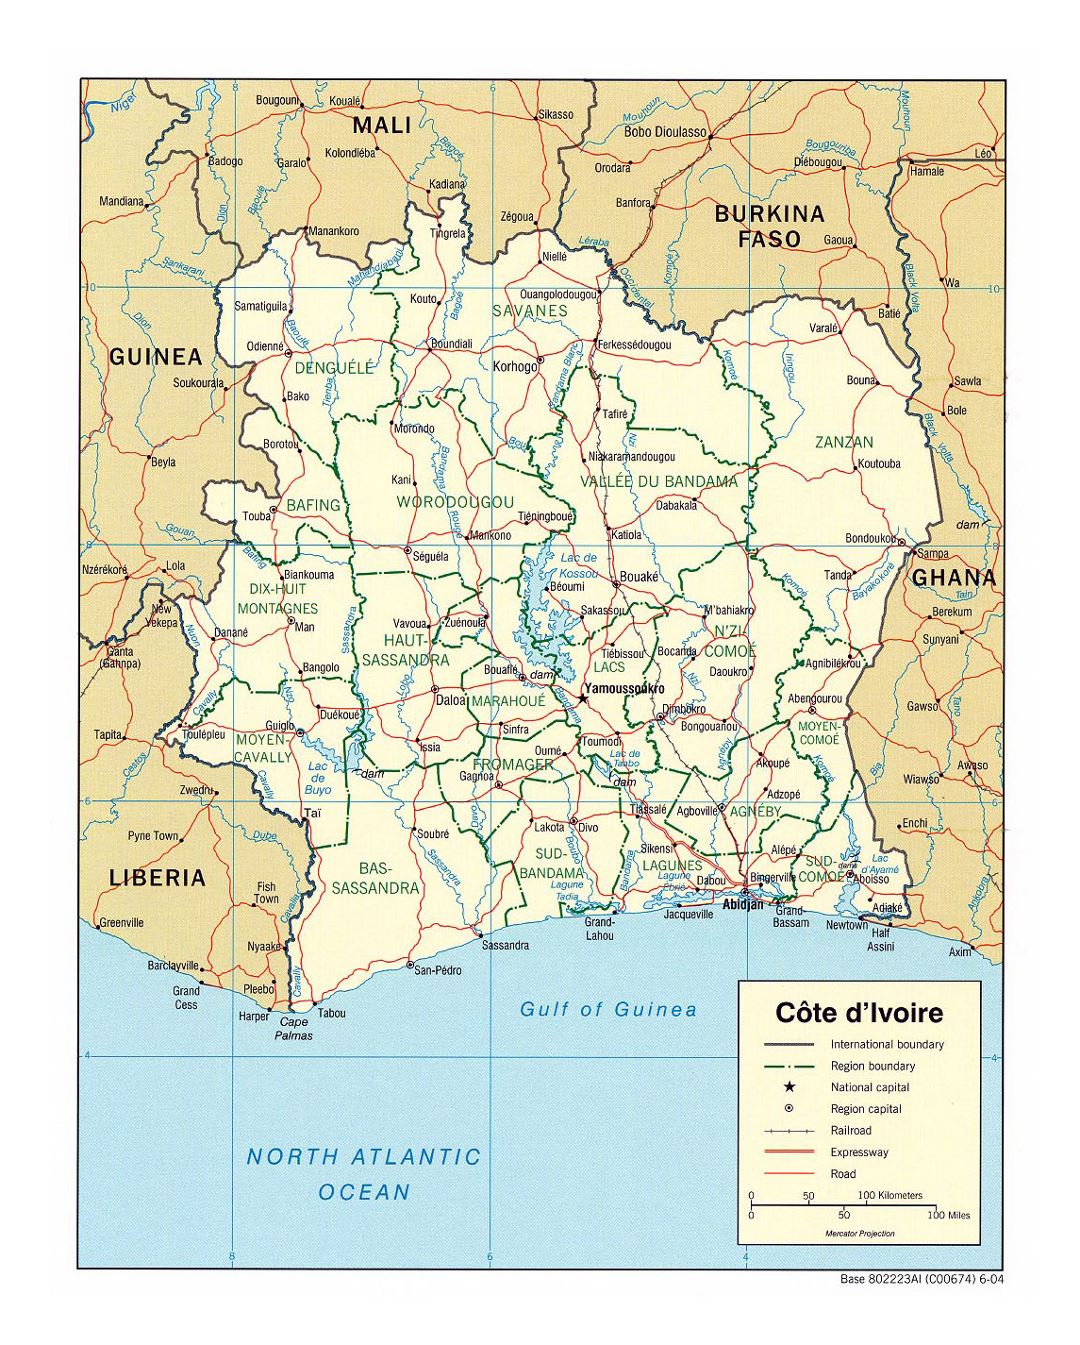 Detailed political and administrative map of Cote d'Ivoire with roads, railroads and major cities - 2004